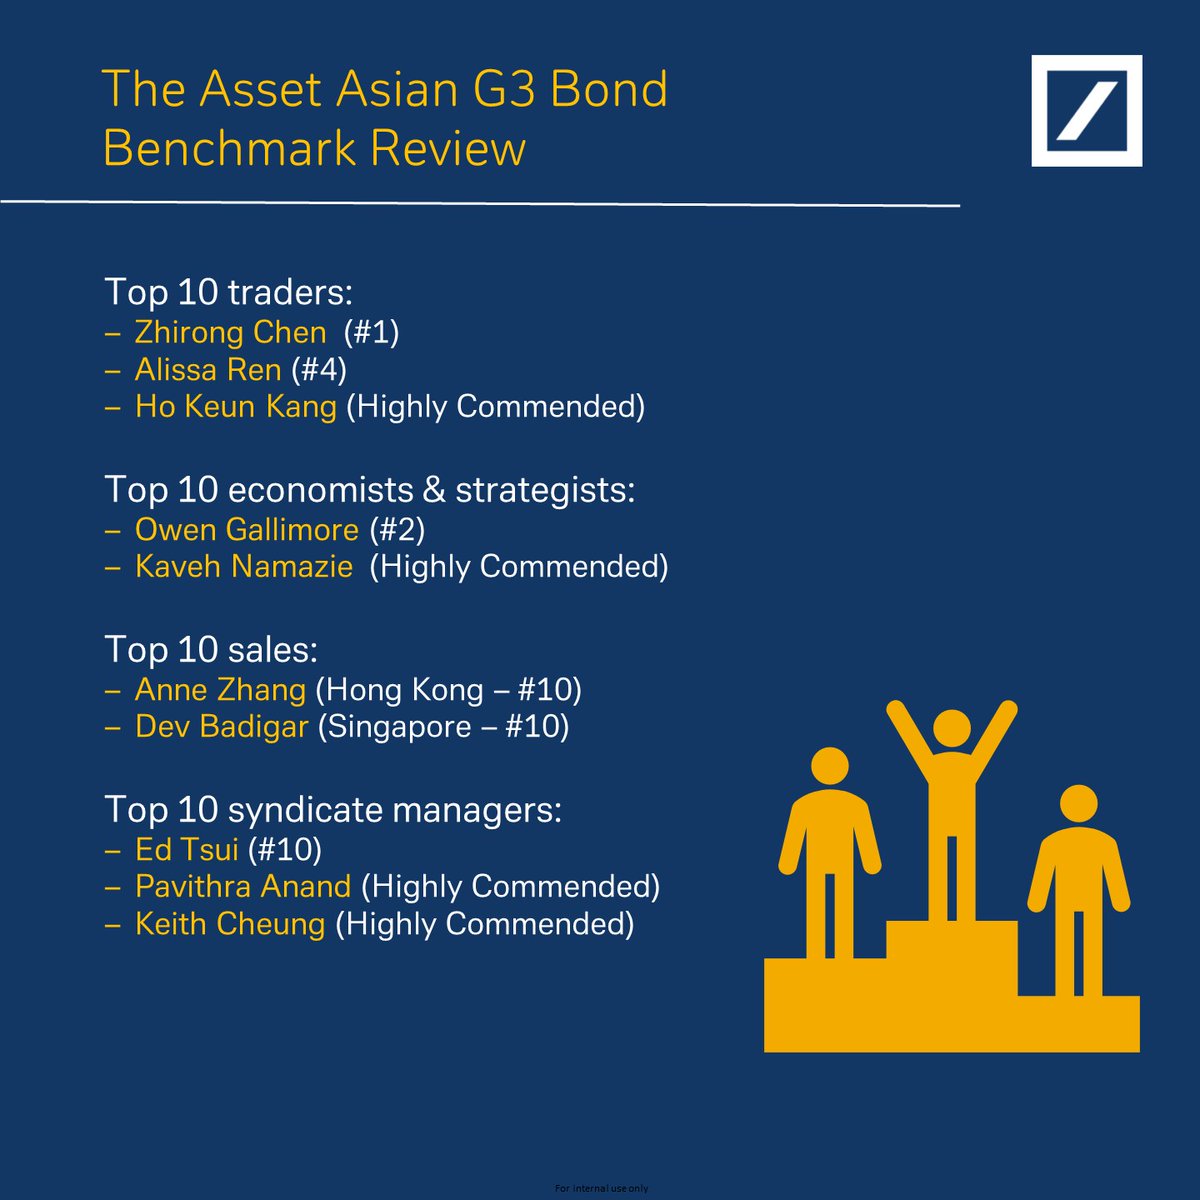 Congratulations to our APAC colleagues who were recognised as top sell-side individuals in the Asset Benchmark Research's latest survey of the secondary Asia G3 #bondmarket! #FixedIncome